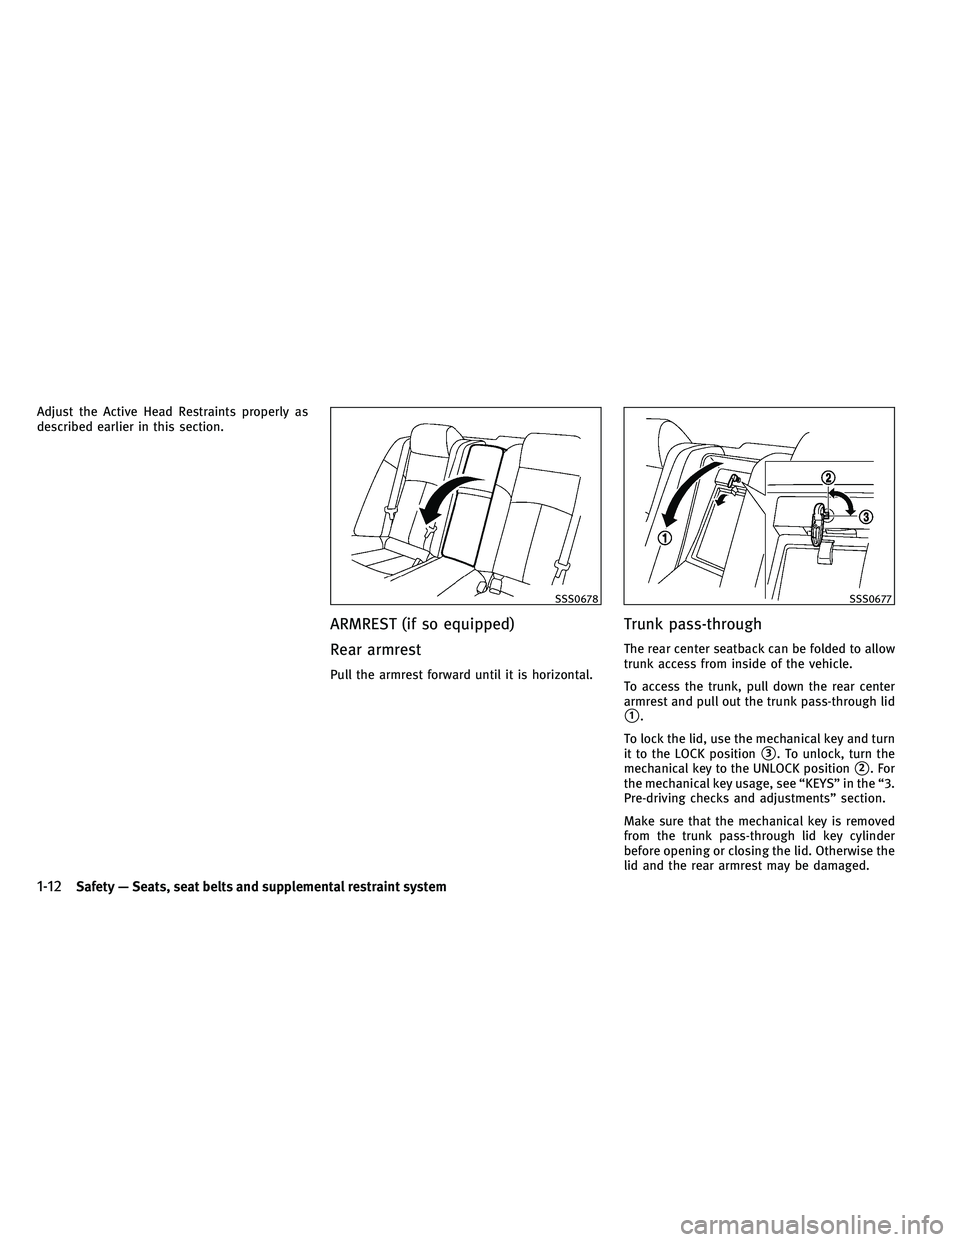 INFINITI G 2011  Owners Manual Adjust the Active Head Restraints properly as
described earlier in this section.
ARMREST (if so equipped)
Rear armrest
Pull the armrest forward until it is horizontal.
Trunk pass-through
The rear cent